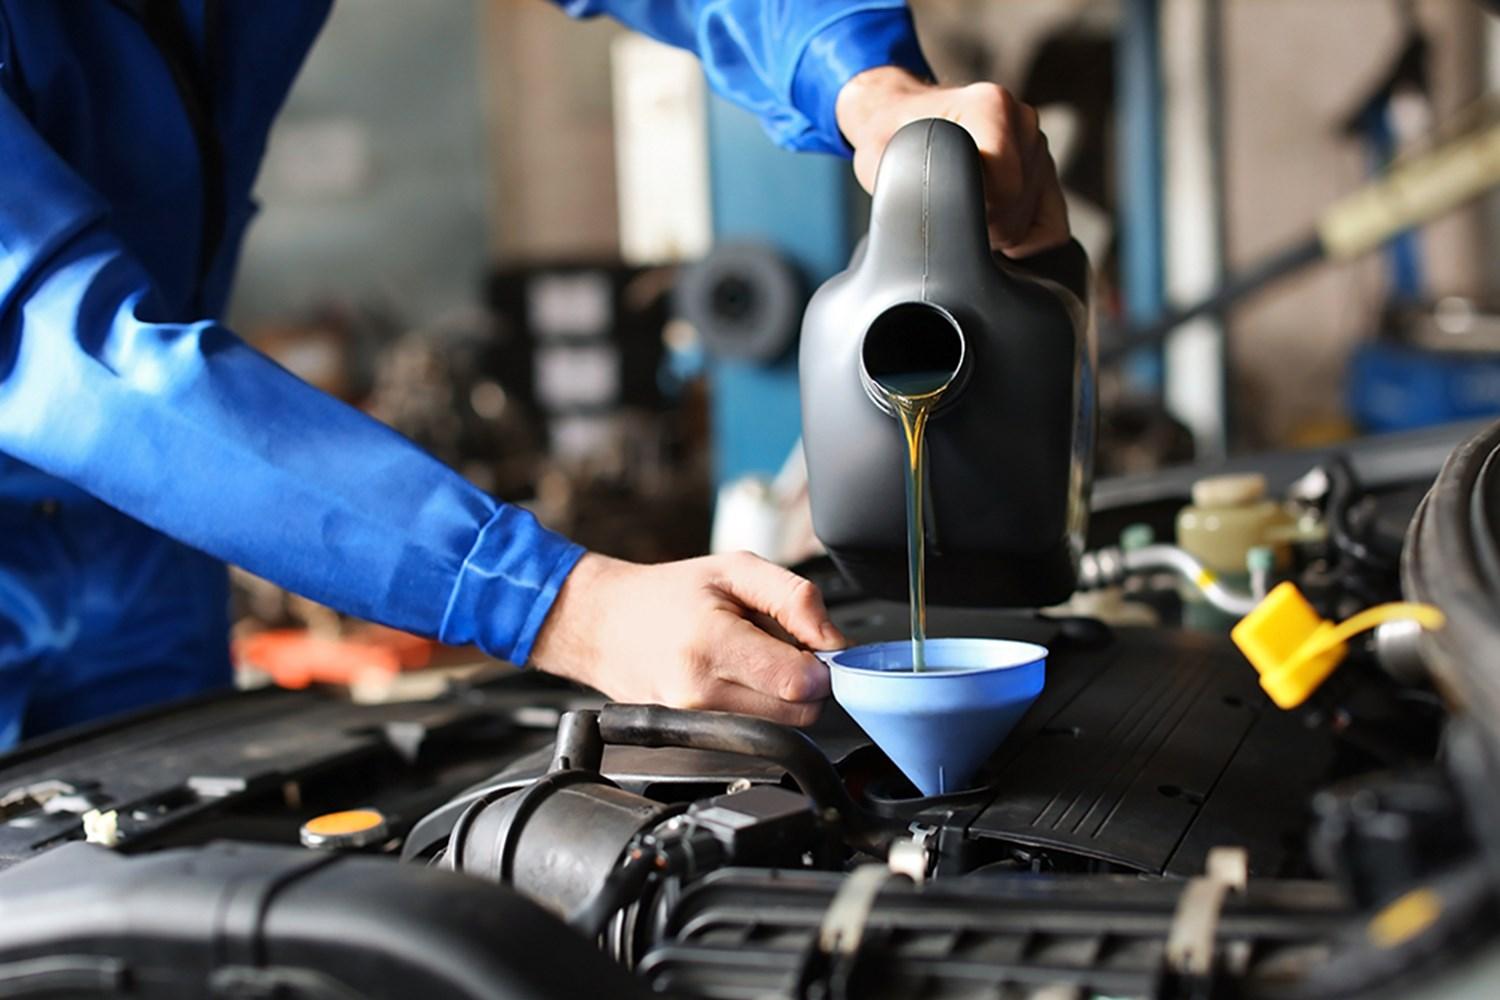 Volkswagen Service Specialist changes brake fluid by pouring fluid into vehicle during maintenance at Volkswagen Approved Repair Centre at Agnew Van Centre, Mallusk